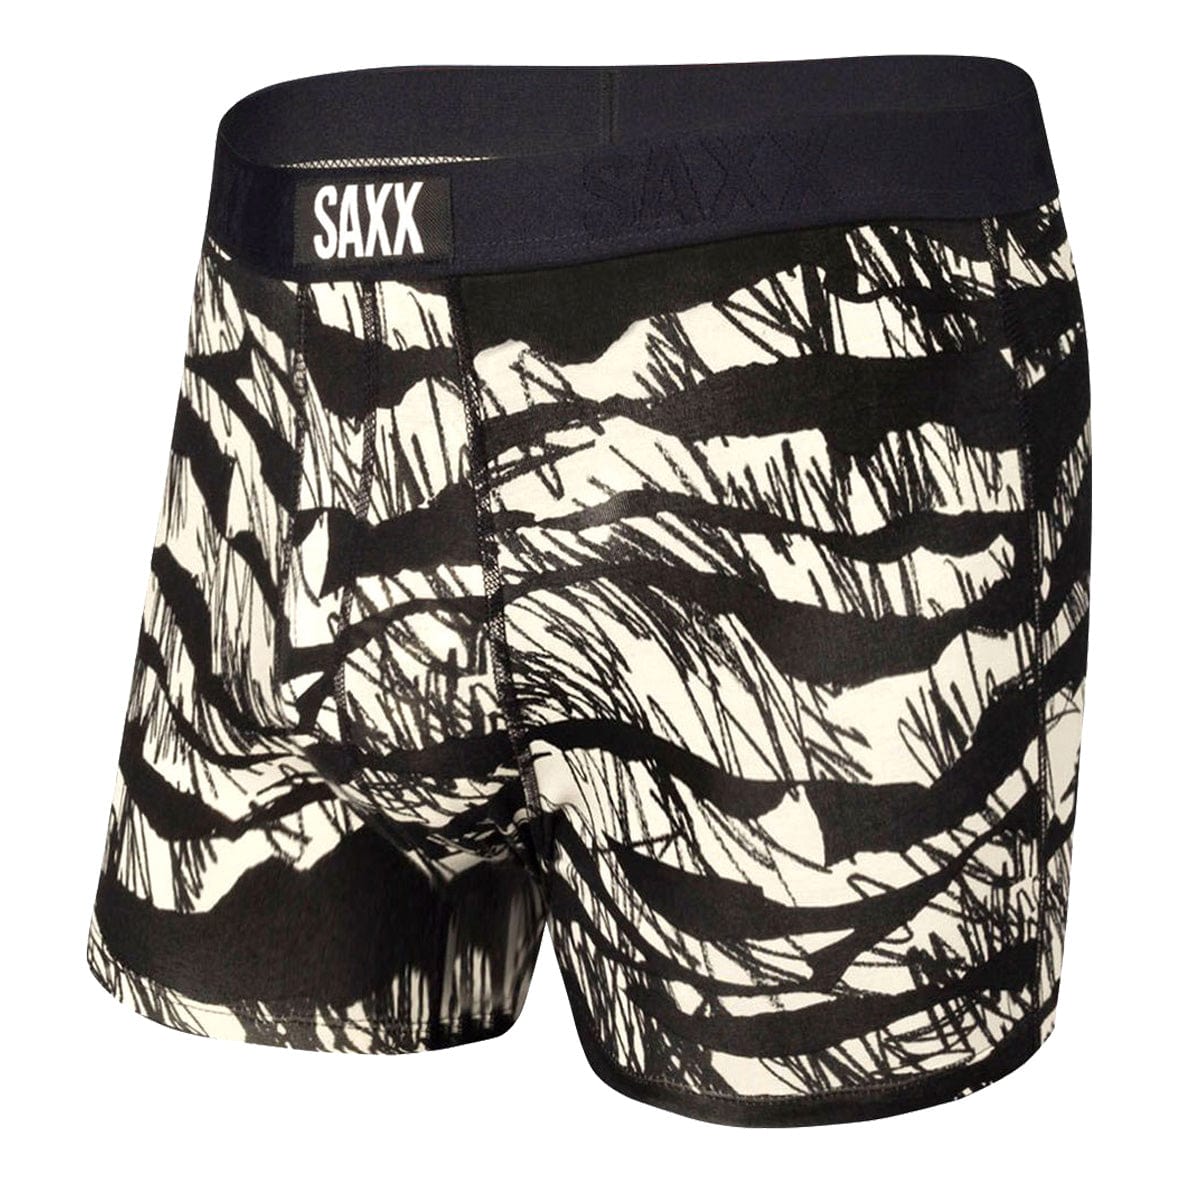 Saxx Vibe Boxers - Black Shred - The Hockey Shop Source For Sports